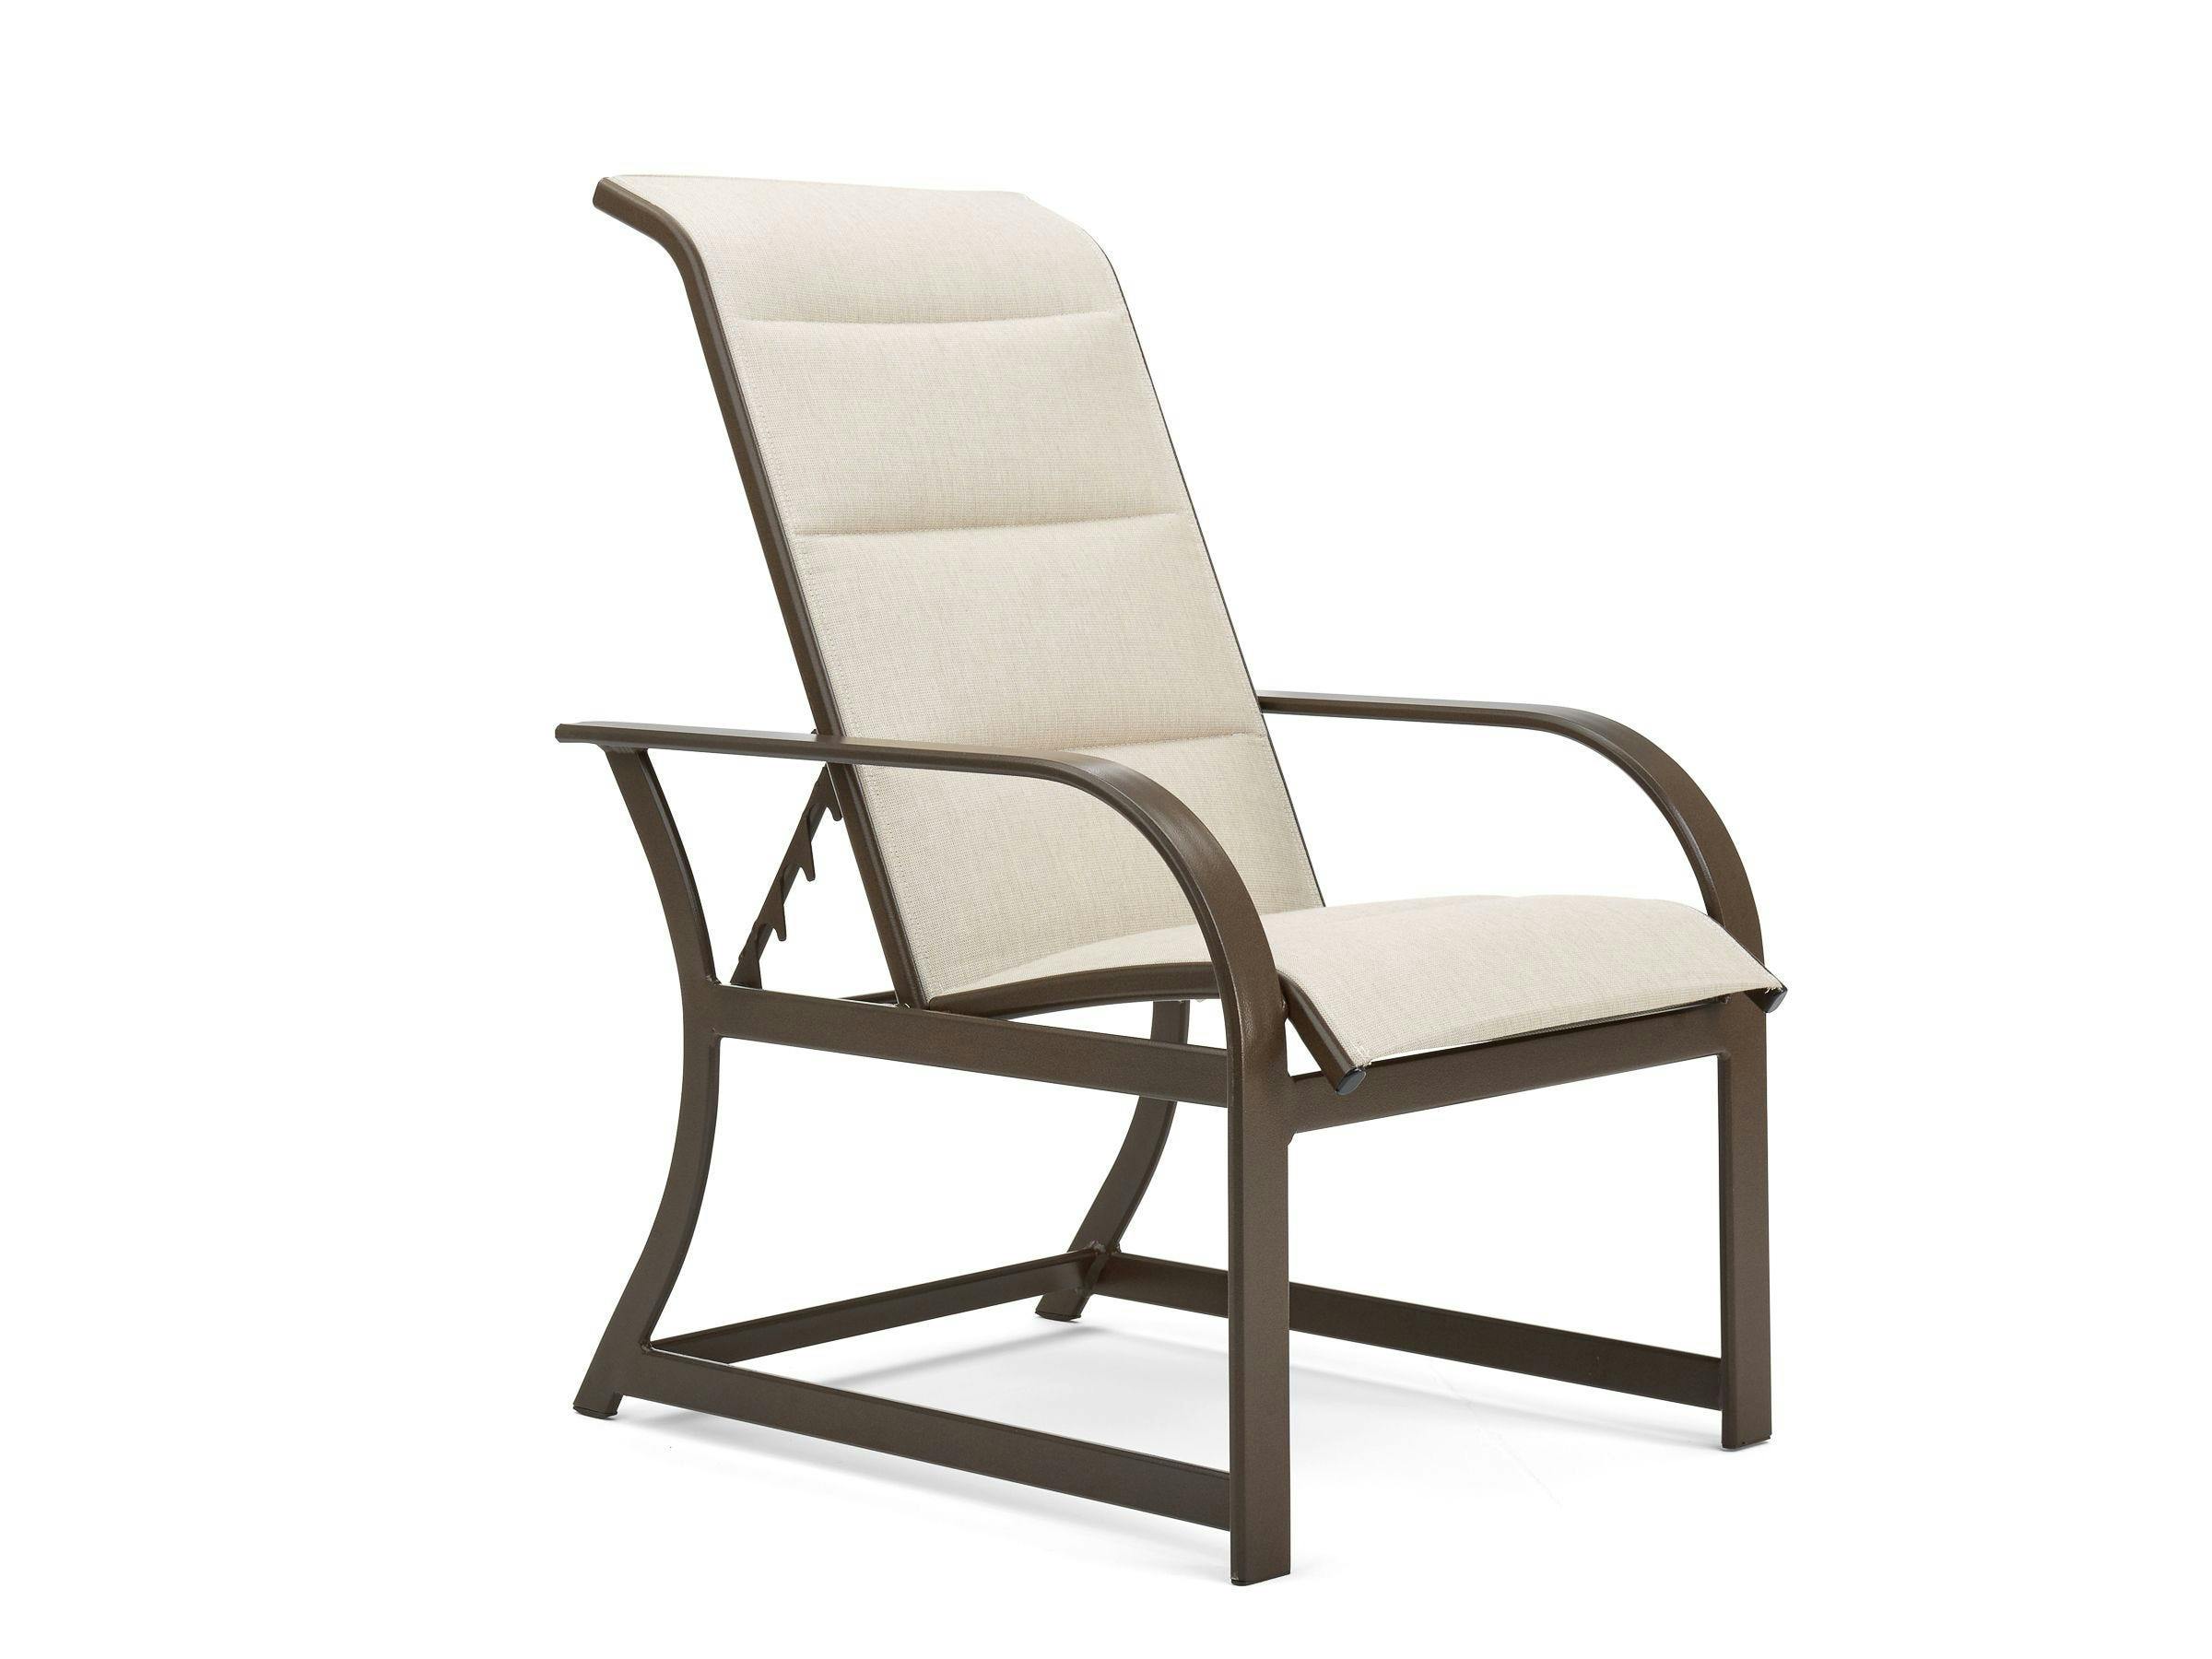 Key West Padded Sling Adjustable Lounge Chair